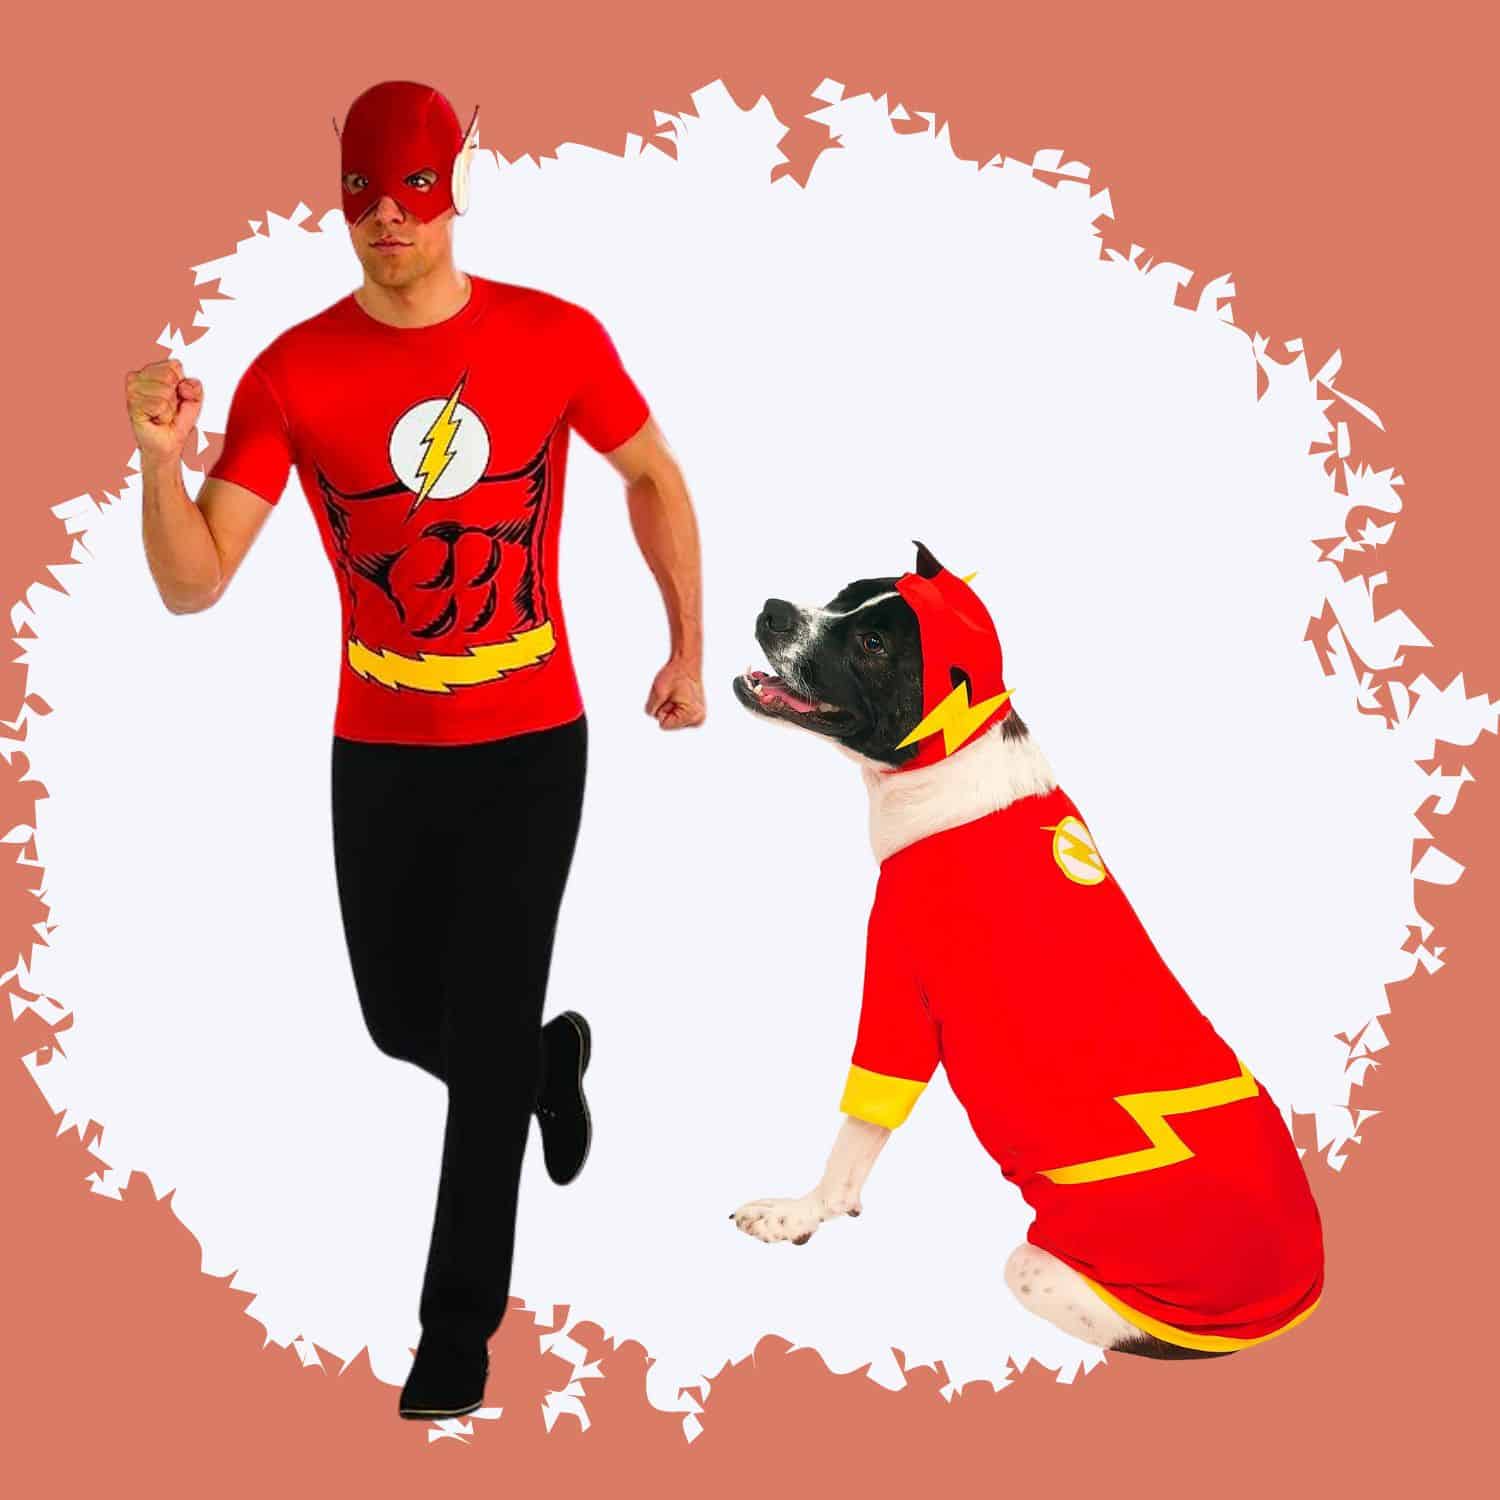 Dog and owner halloween costumes The Flash - dog Christmas ornaments | PawCool ™